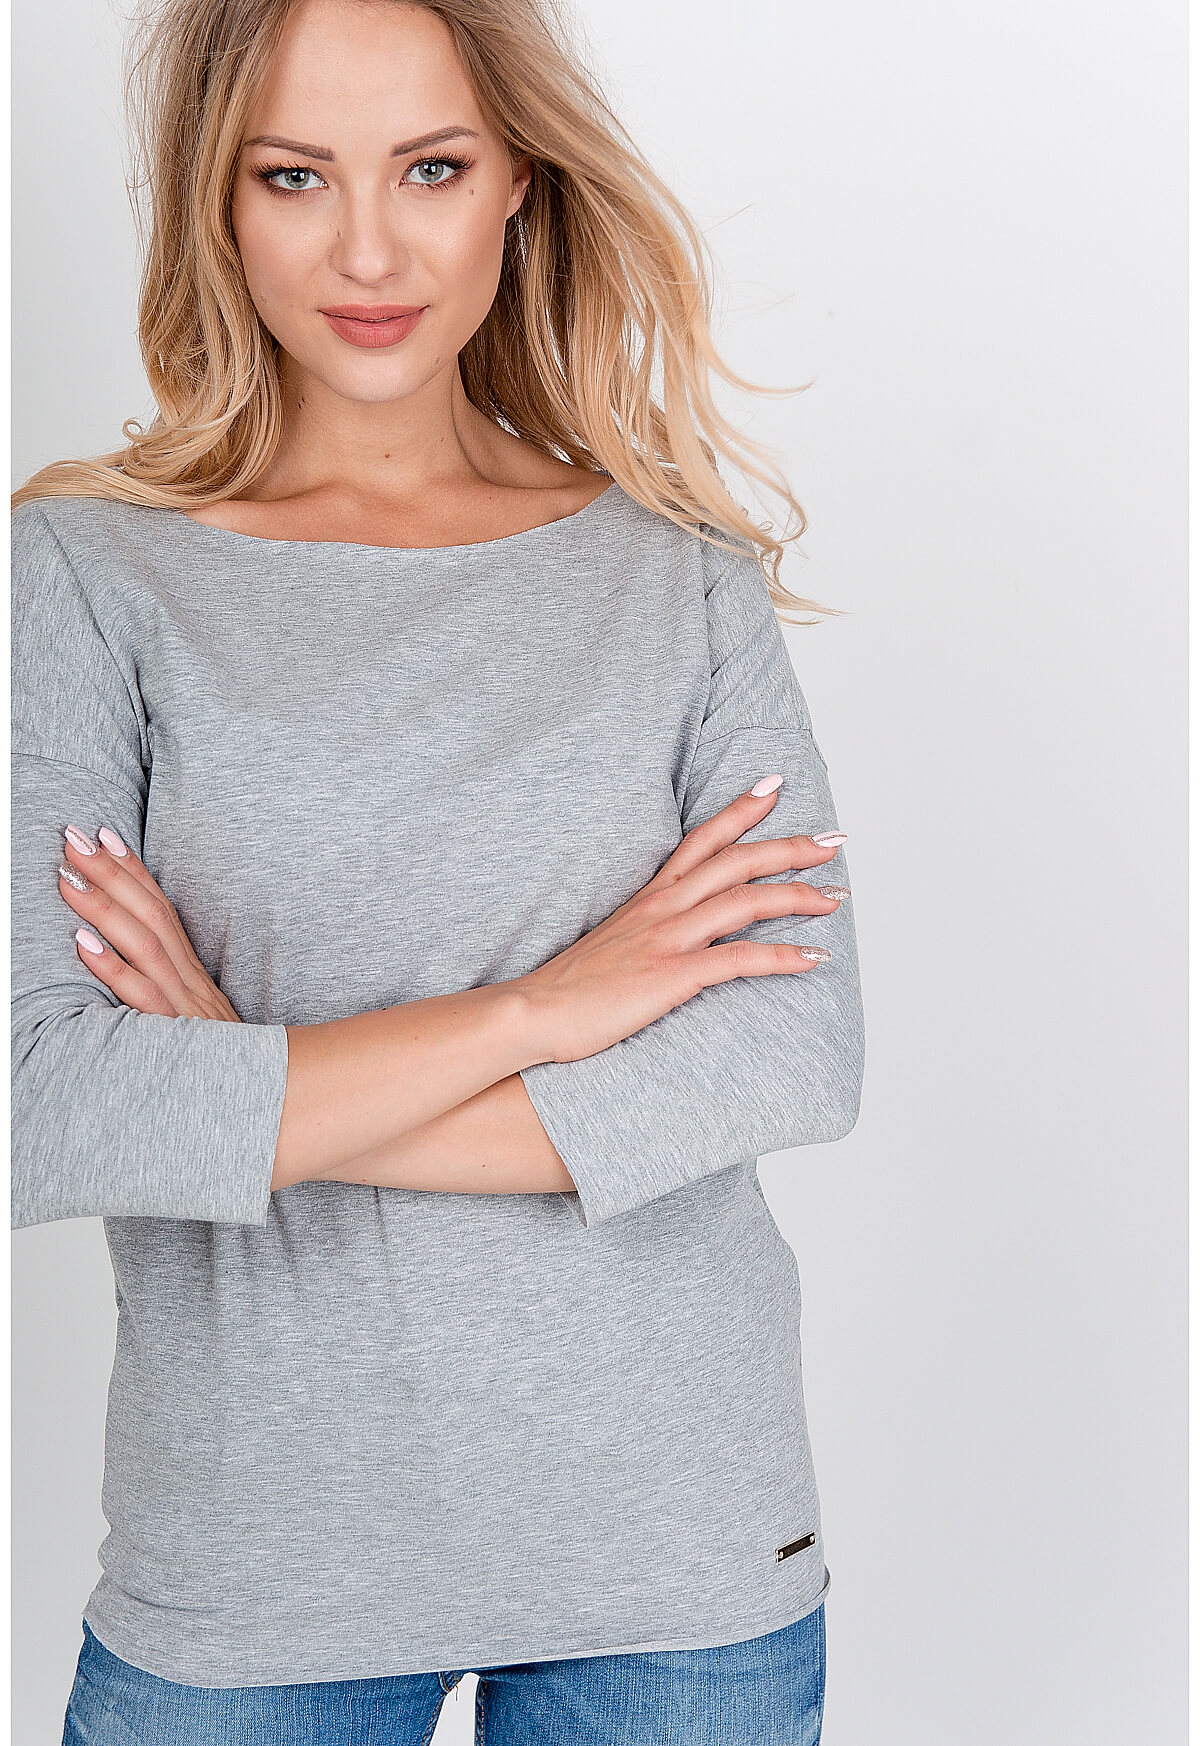 Elegant women's blouse with 3/4 sleeves - gray,